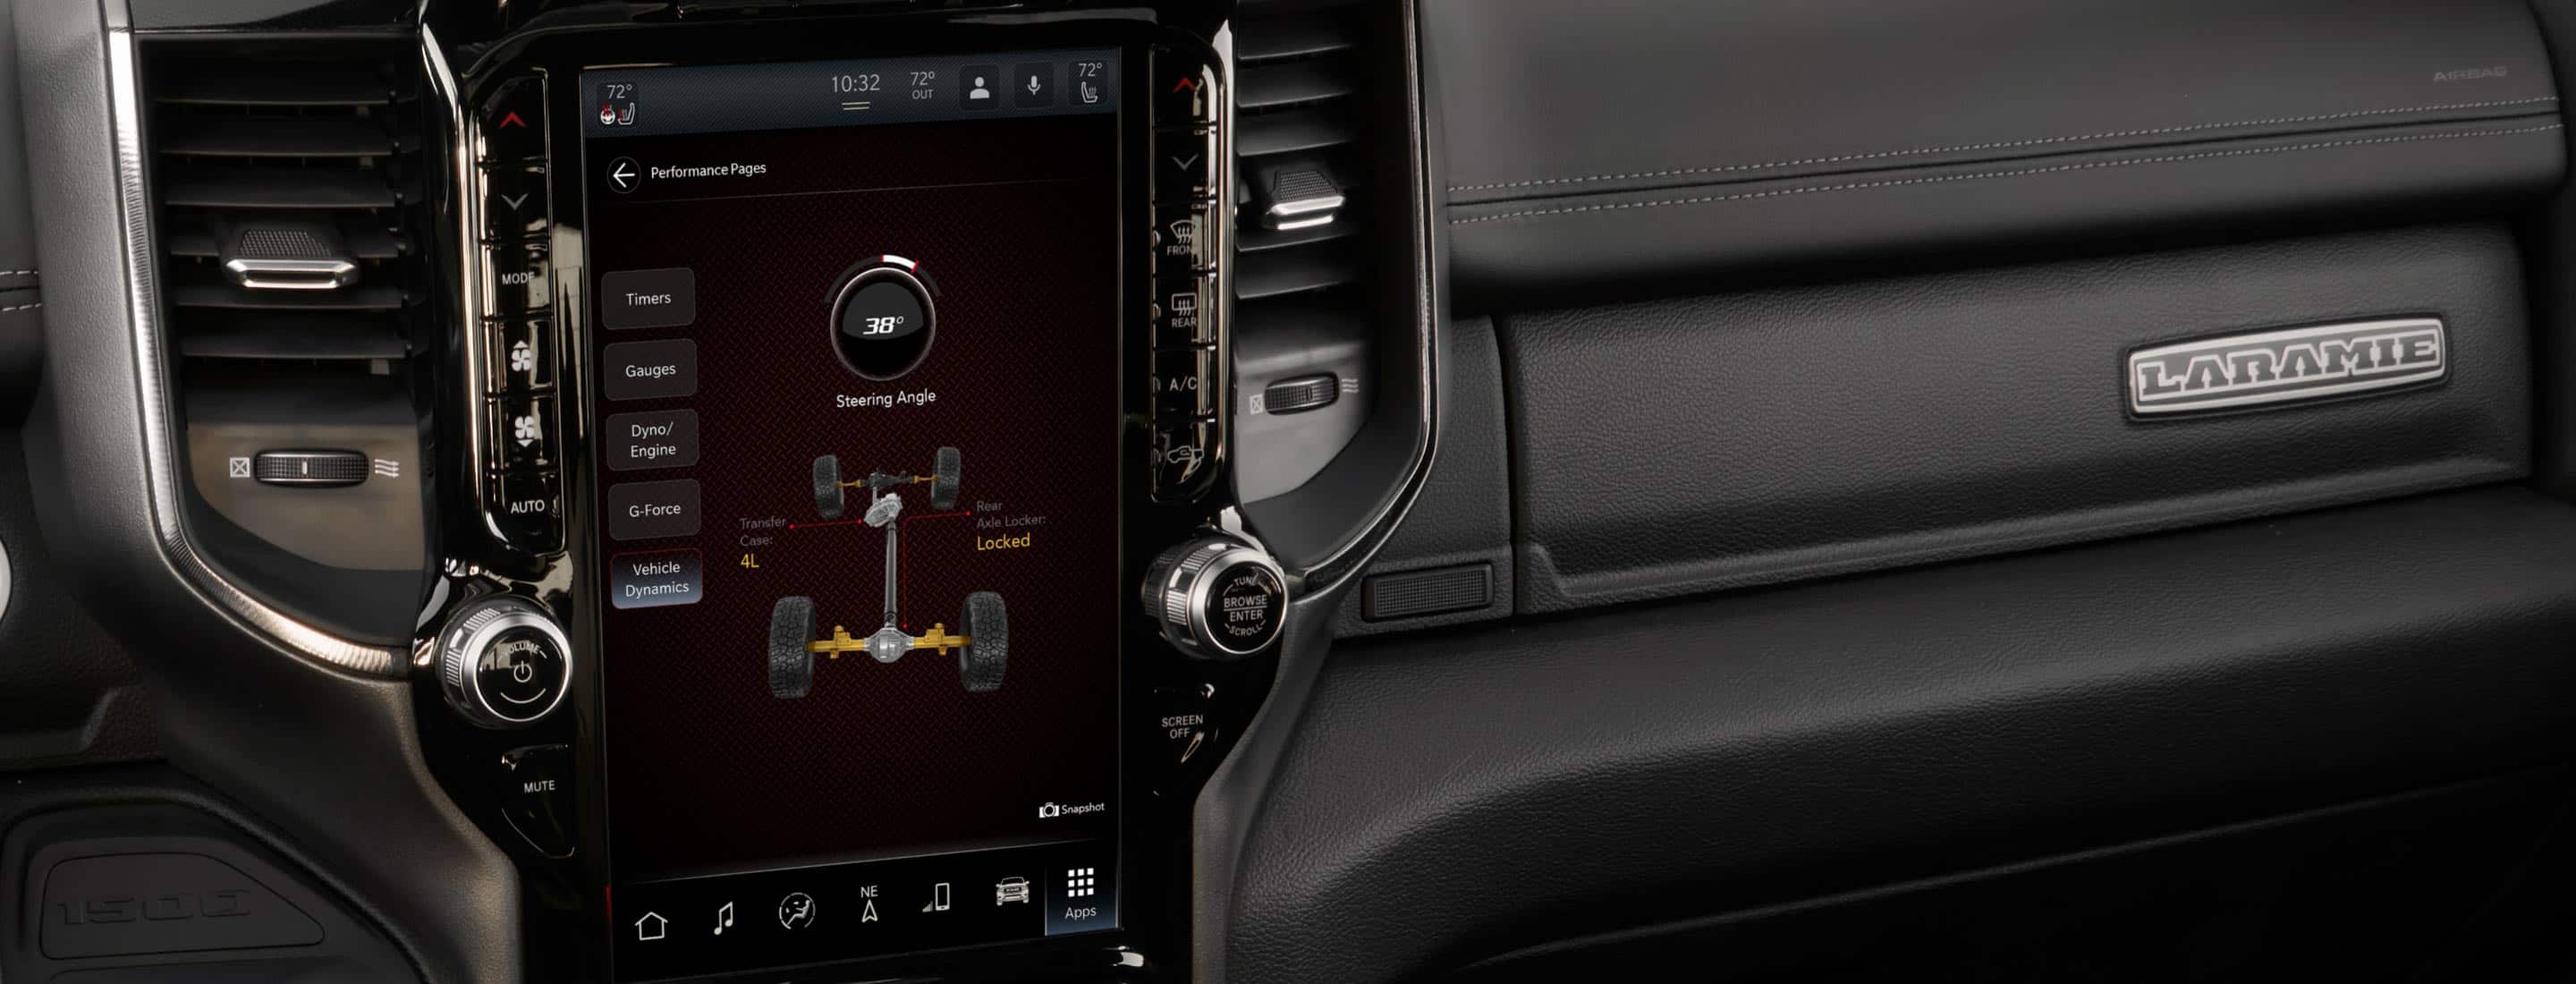 The performance pages in the 2022 Ram 1500 Laramie G/T displaying steering angle and status of rear axle locker.